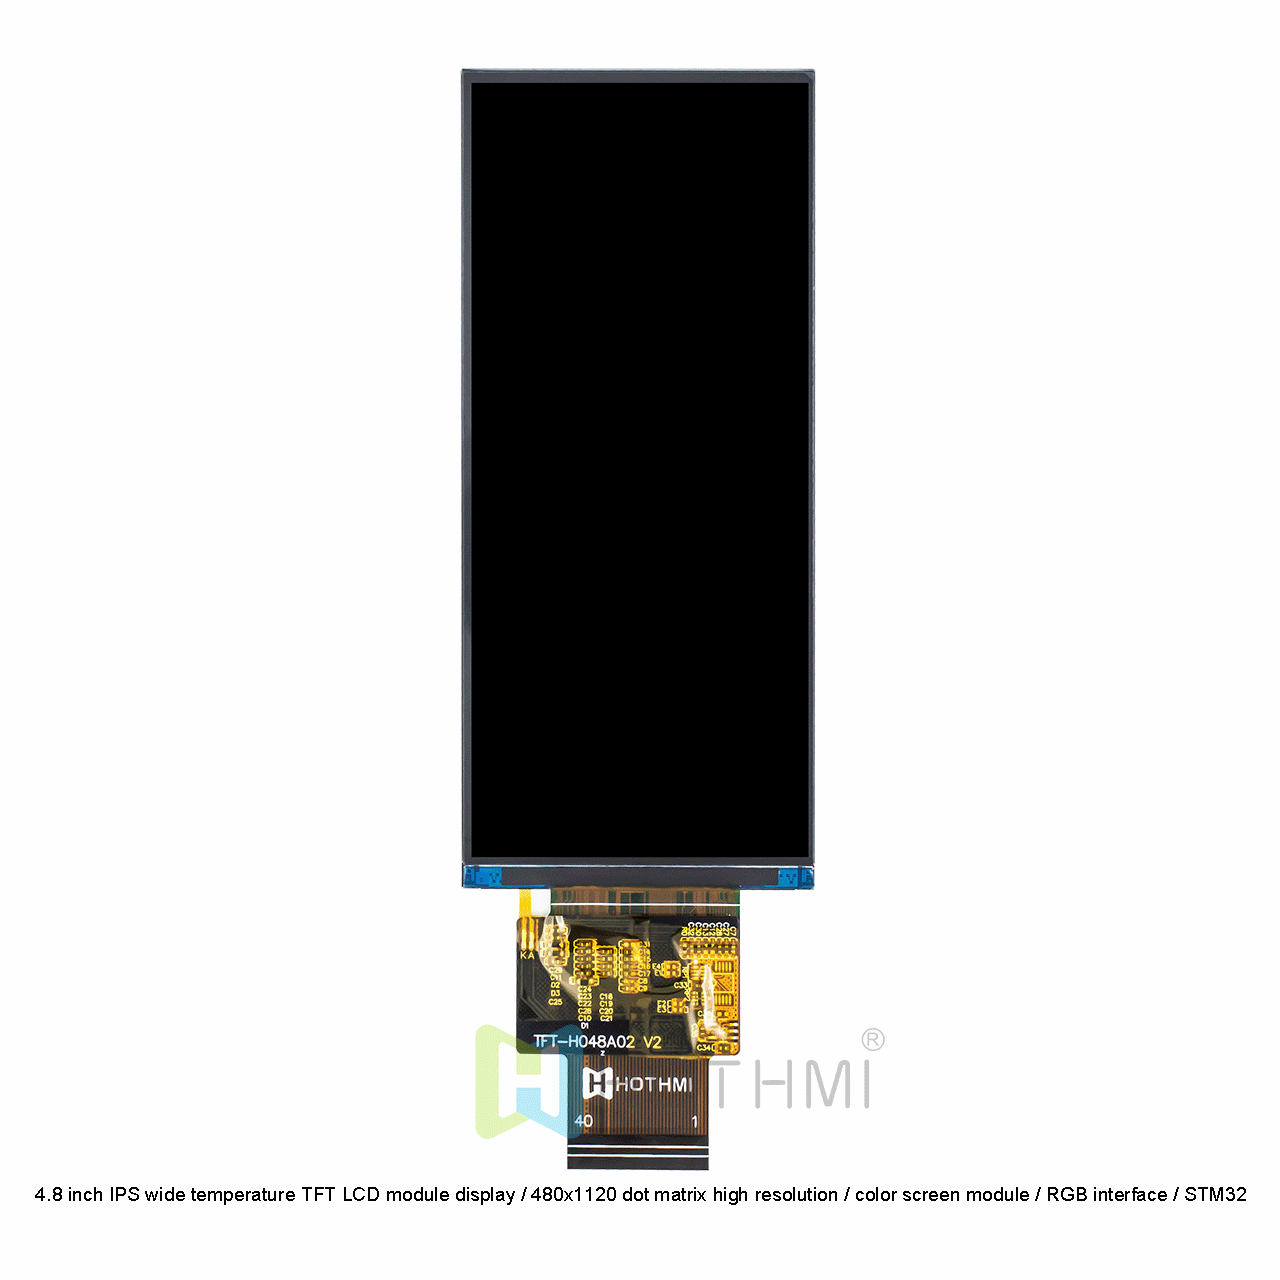 4.8 inch IPS wide temperature TFT LCD module display / 480x1120 dot matrix high resolution / color screen module / RGB interface / STM32